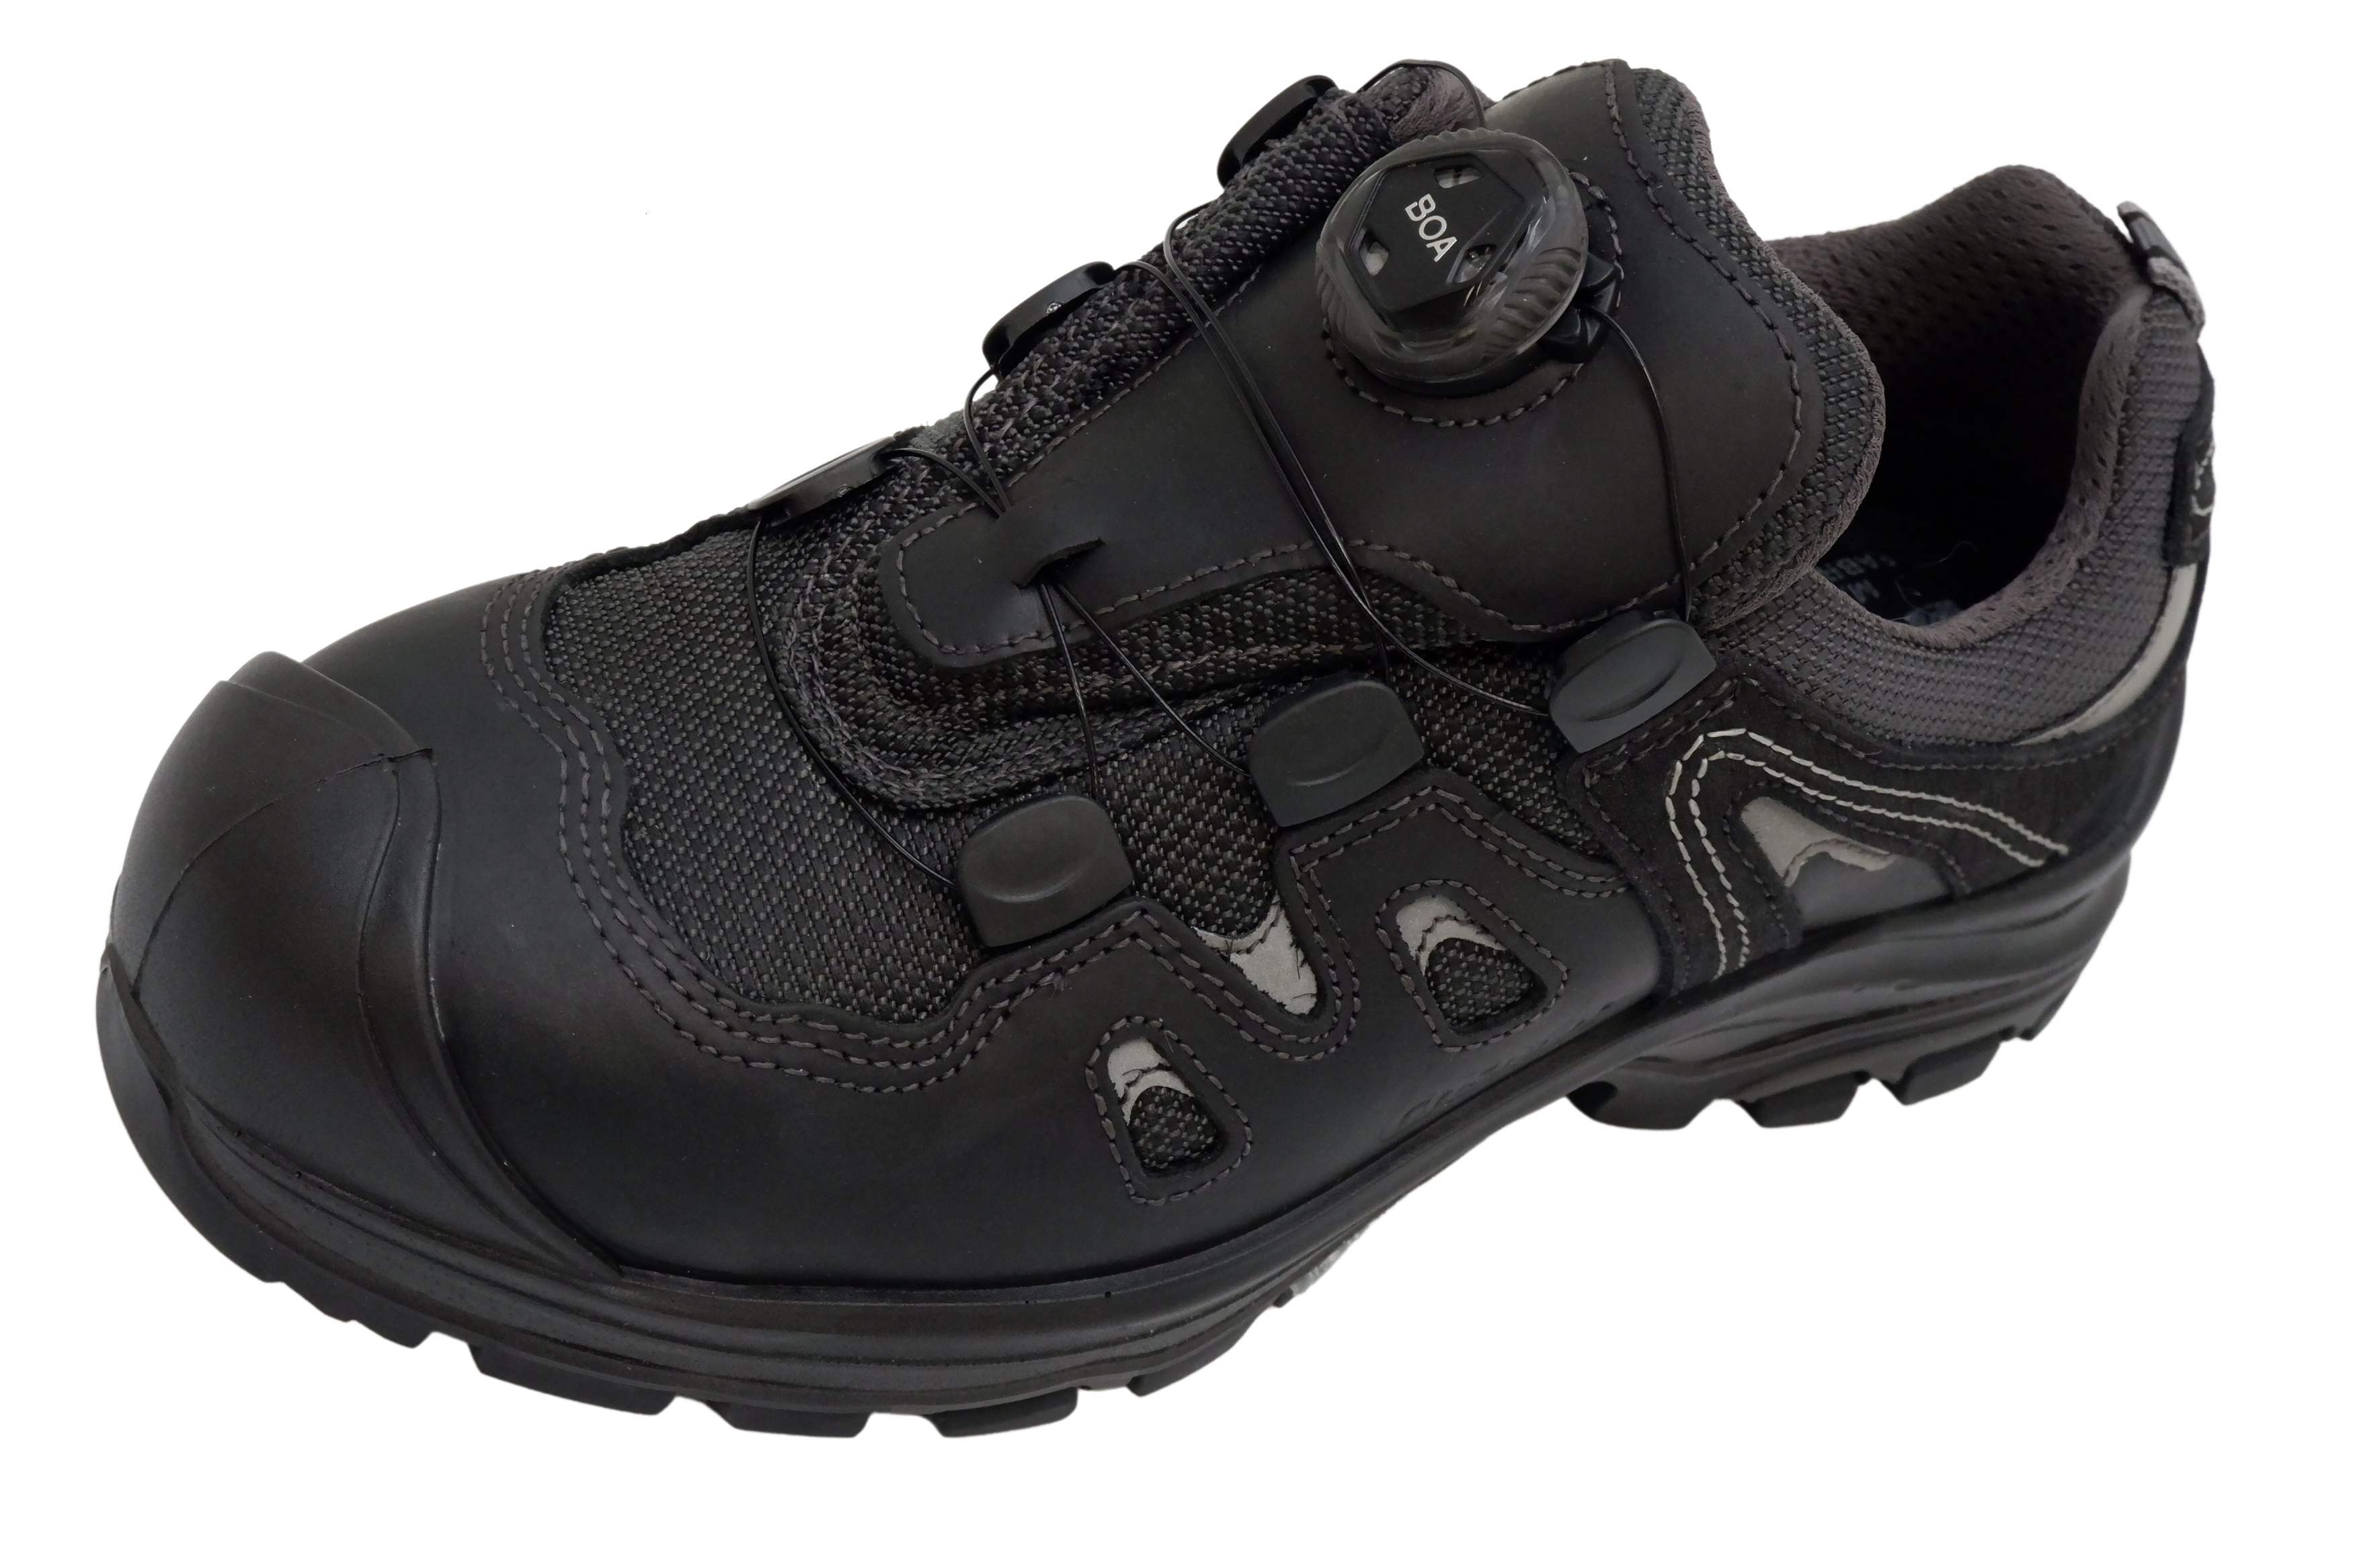 Grisport Men's Safety Work Shoes BOA Lite Breathable Upper Vibram® Sole with Steel Toe Cap Sizes 7-13